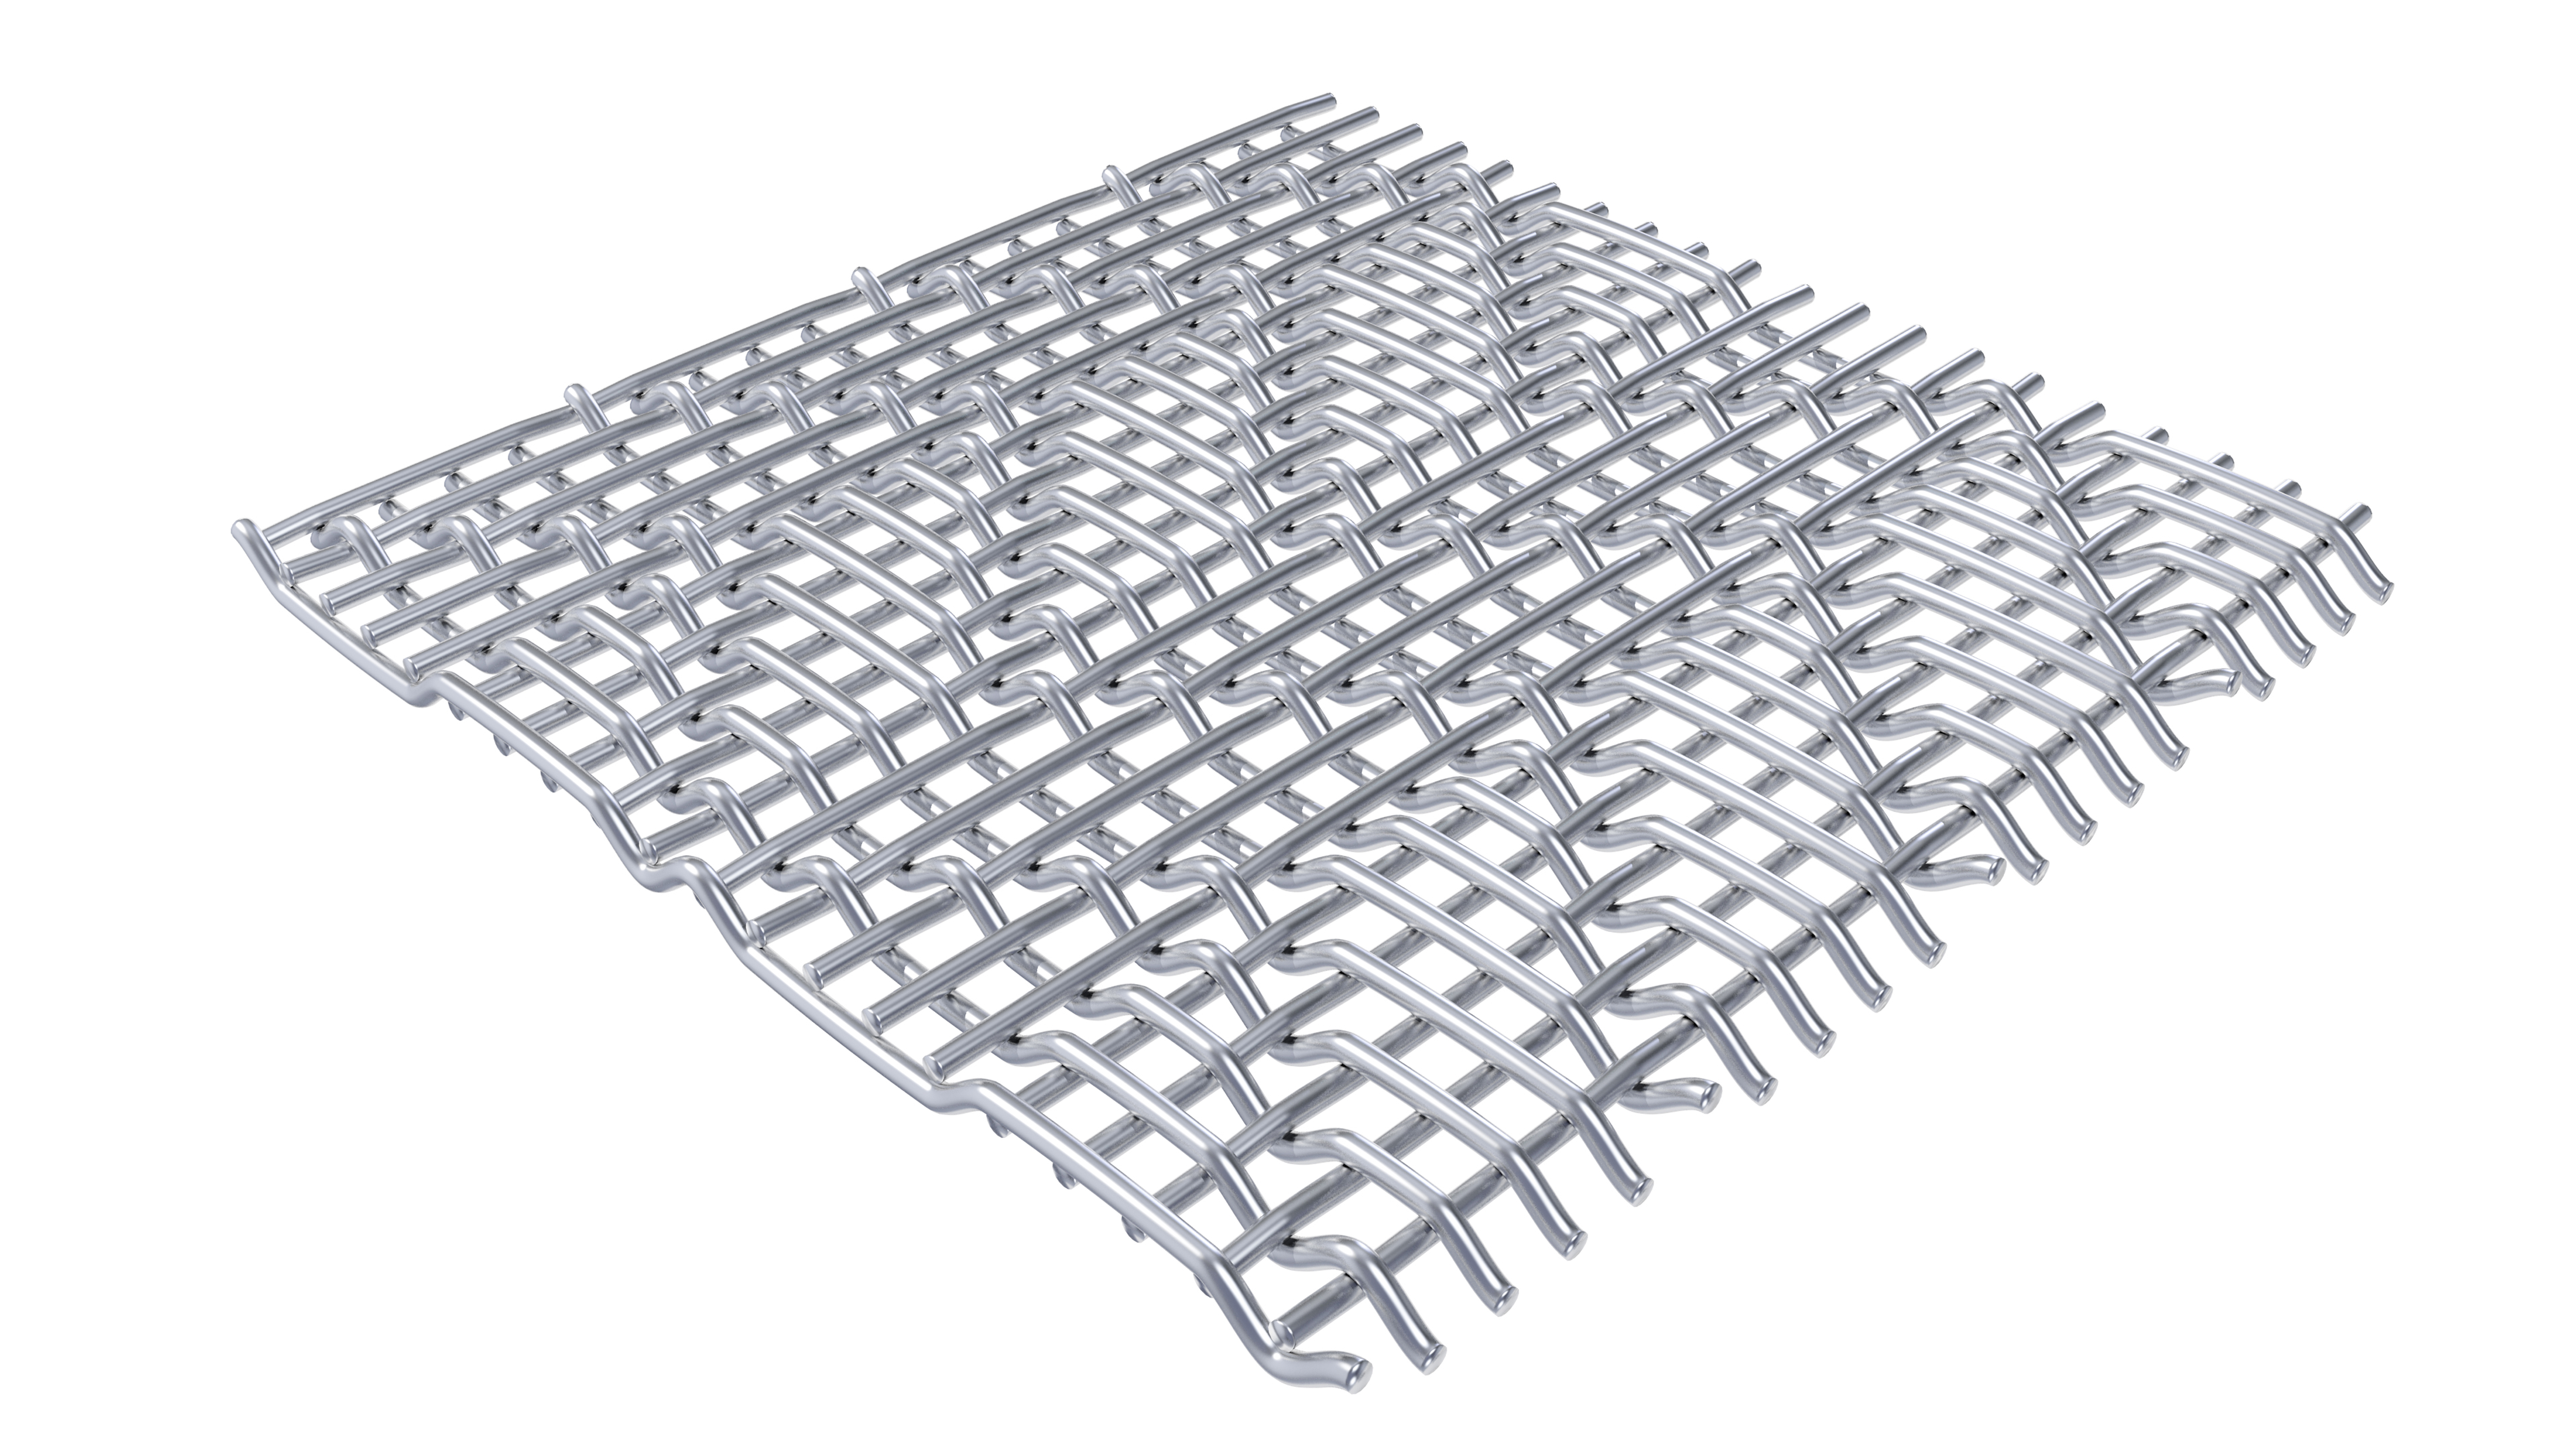 Volumetric mesh from GKD, produced from high temperature- resistant stainless steel, could have 70% greater volume porosity than conventional square mesh.